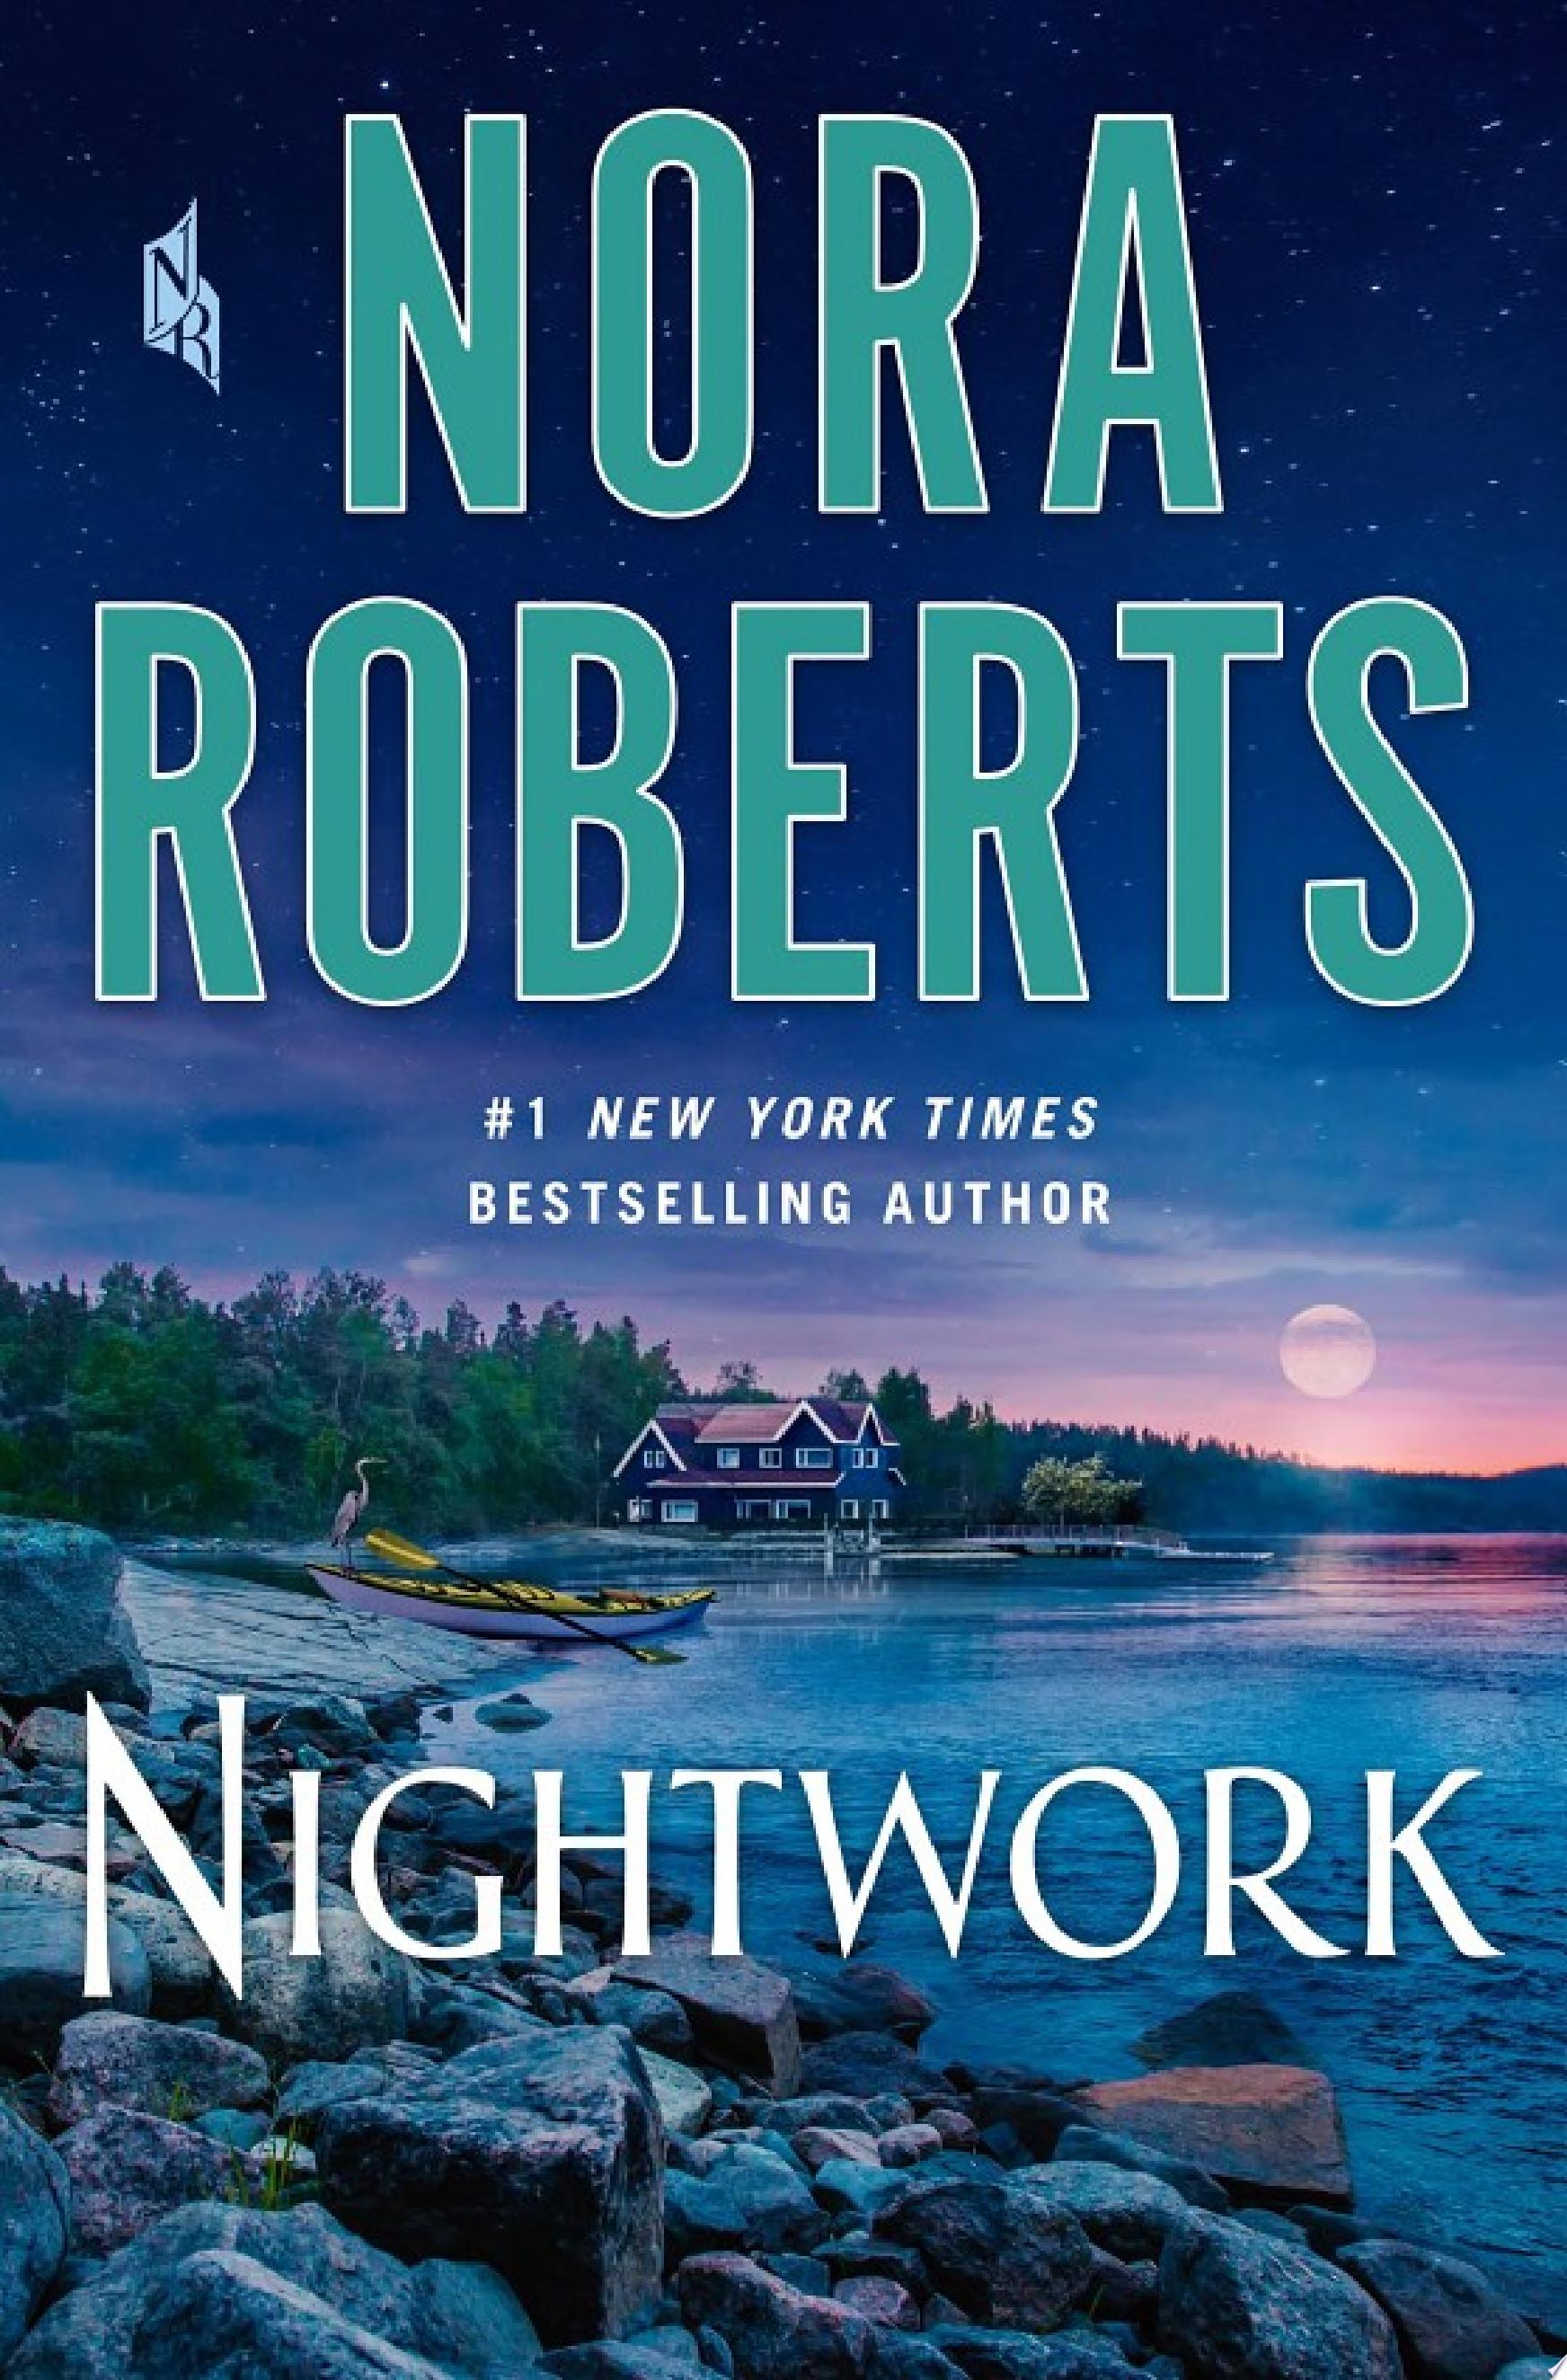 Image for "Nightwork"